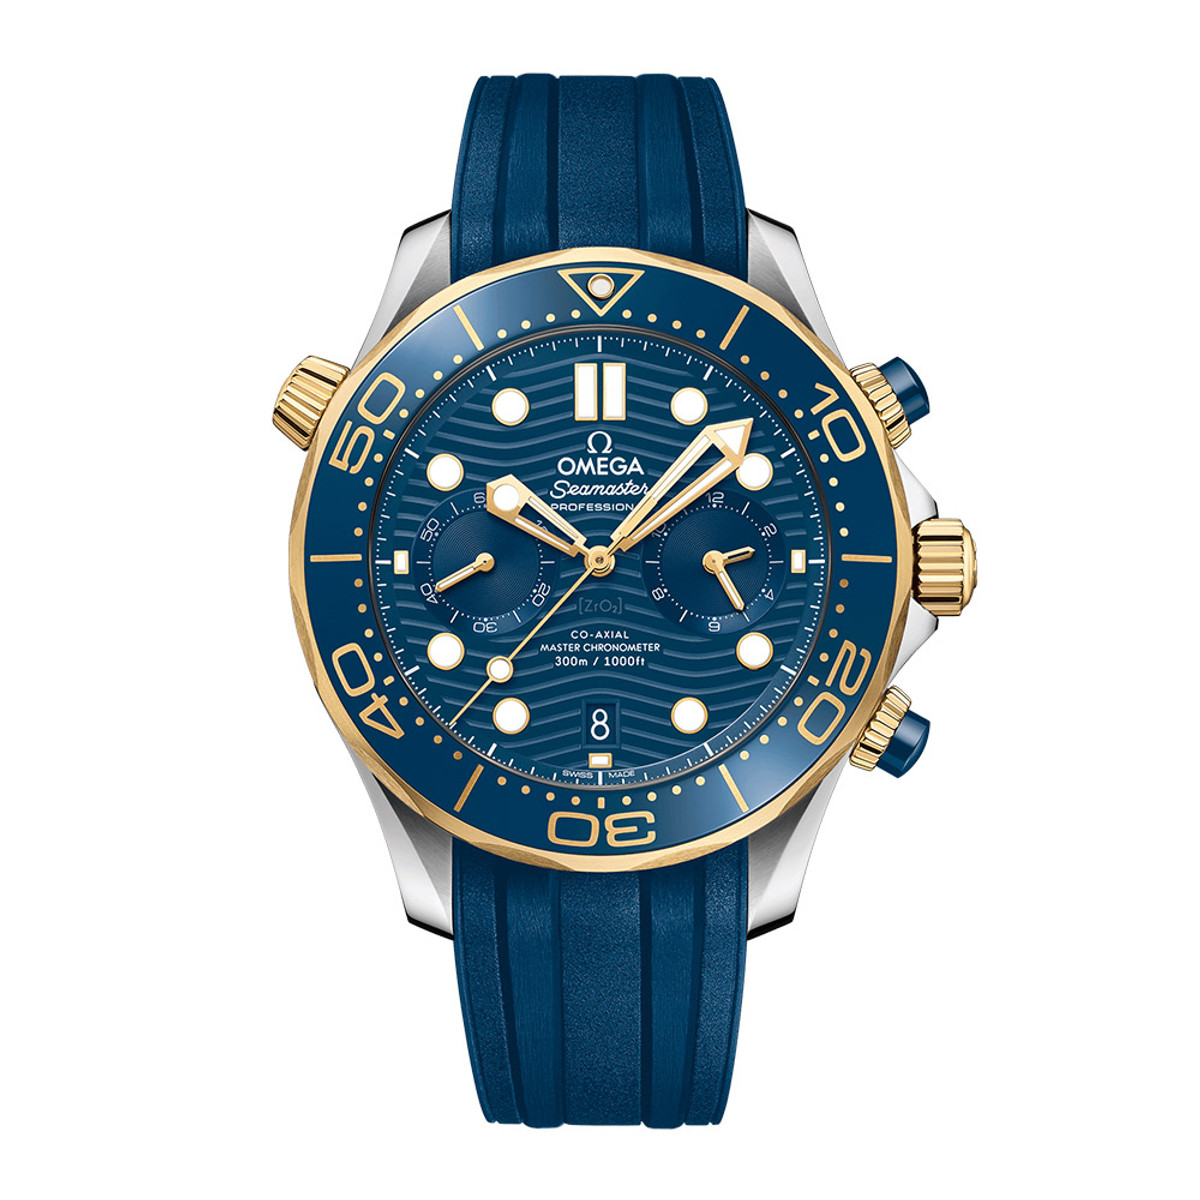 Omega Seamaster Diver 300M Chronograph 18K Yellow Gold & Steel 44mm 210.22.44.51.03.001-WOMG0892 Product Image